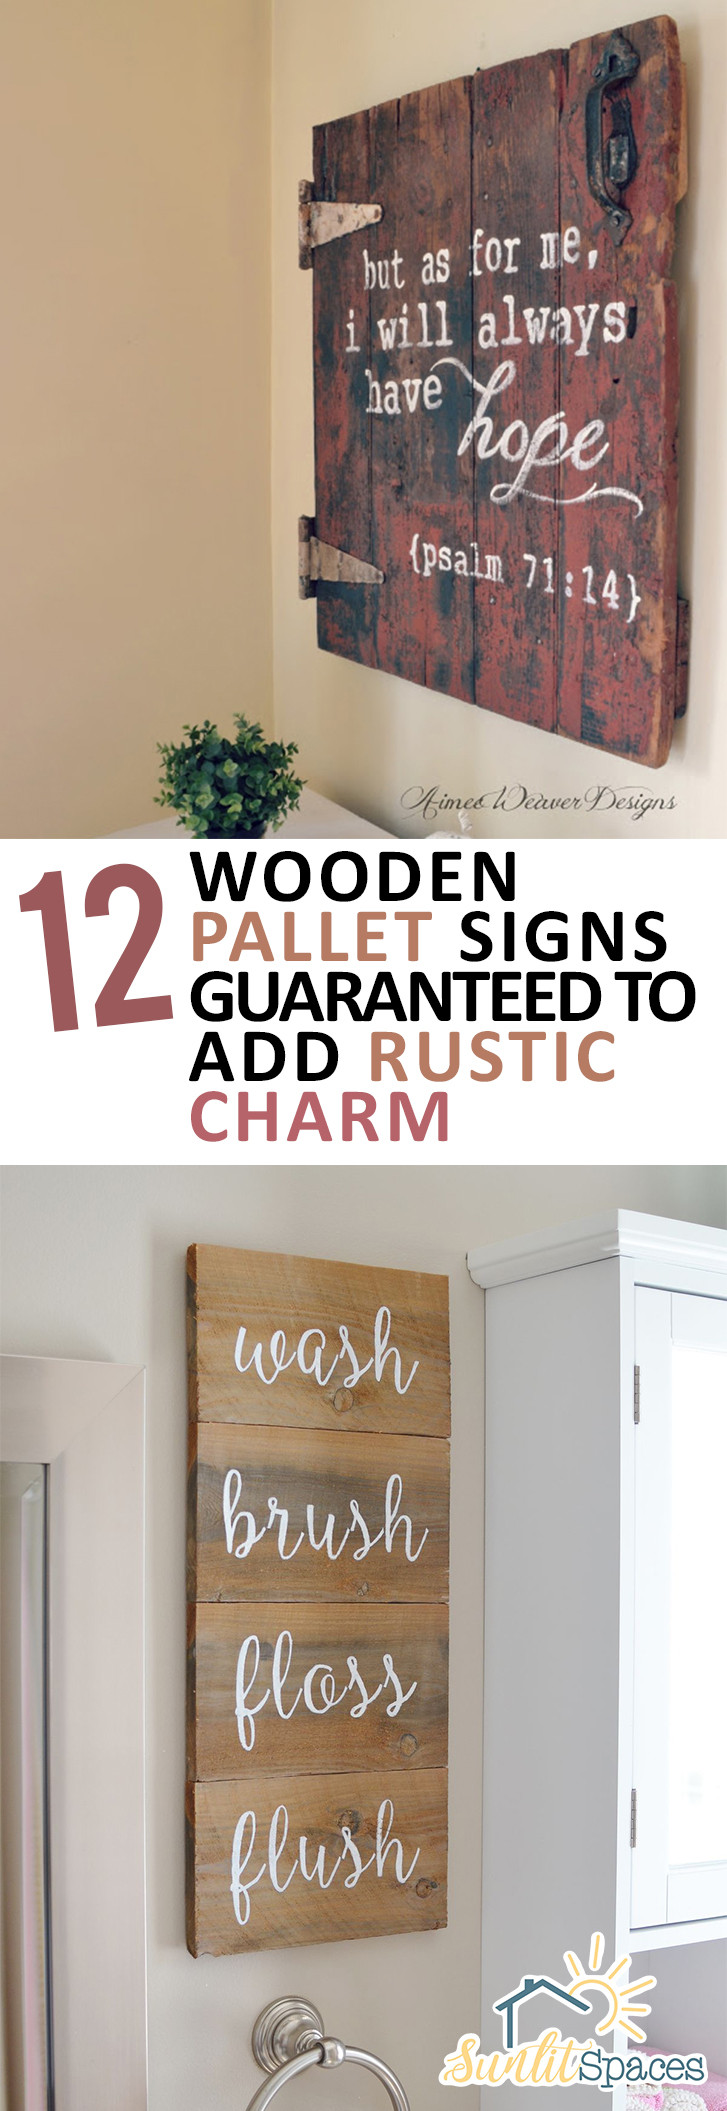 DIY Wood Pallet Sign
 12 Wooden Pallet Signs Guaranteed to Add Rustic Charm